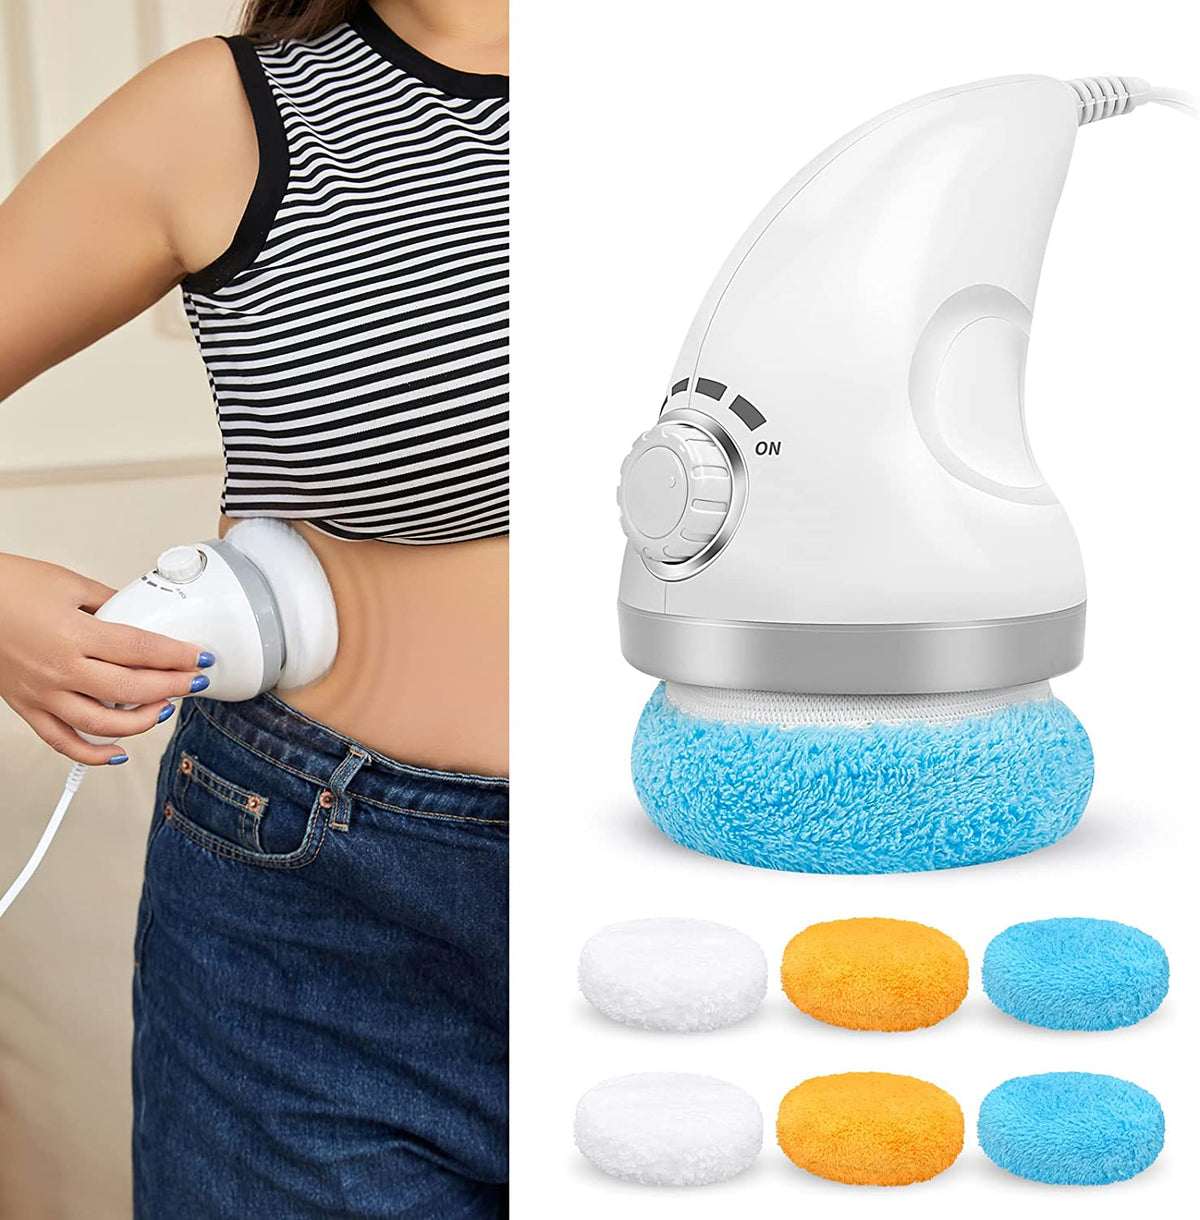 Cellulite Massager Body Sculpting Machine Electric Handheld Body Massager for Belly Waist Butt Arms Legs, Including 6 Skin Friendly Cloth Pads